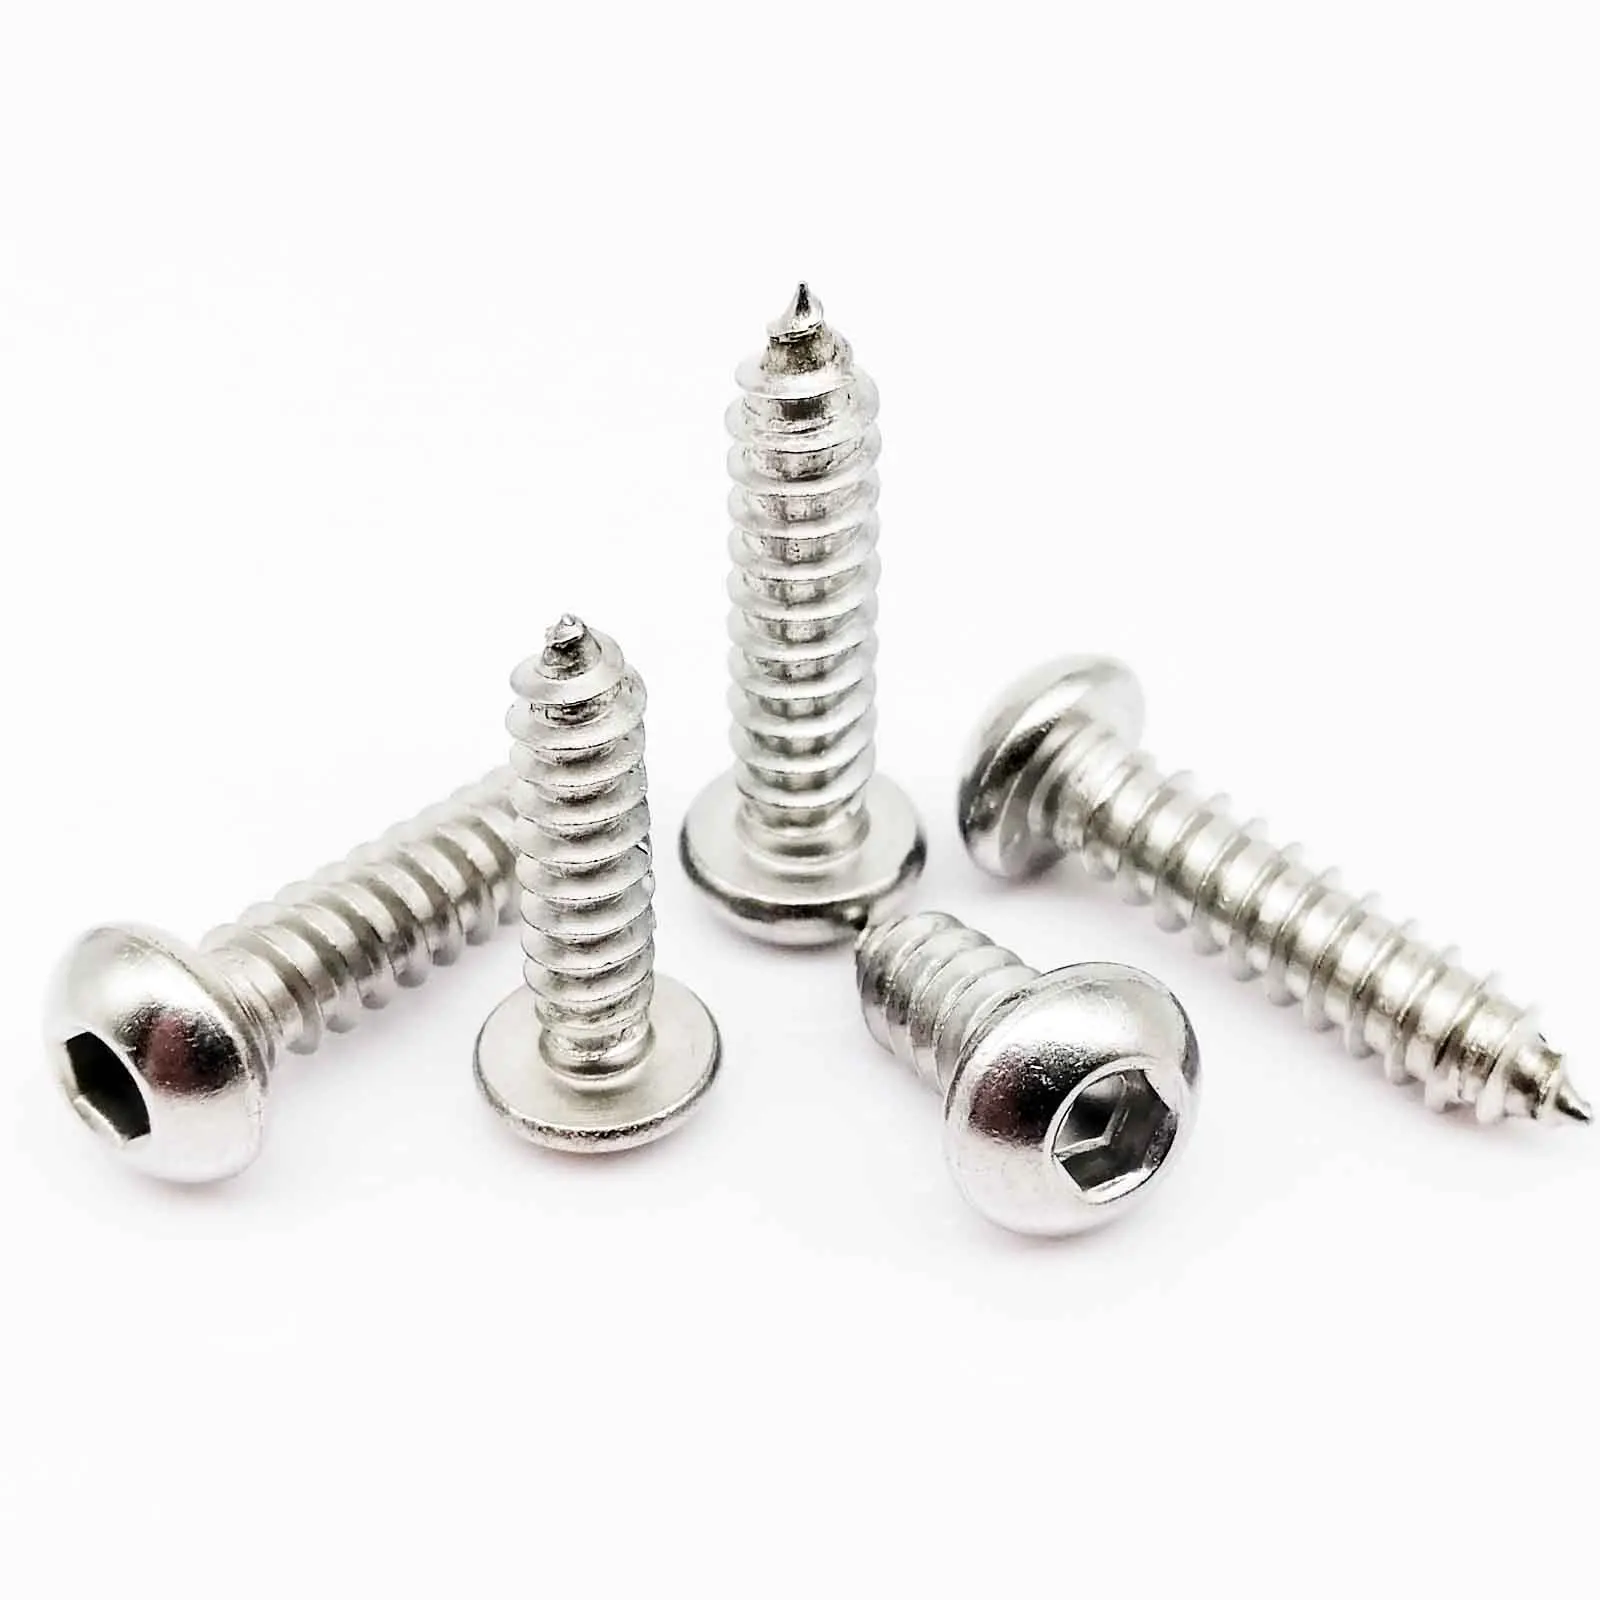 M6 304 Stainless Steel A2 Button Head Socket Cap Self Tapping Screws Hex Drive 